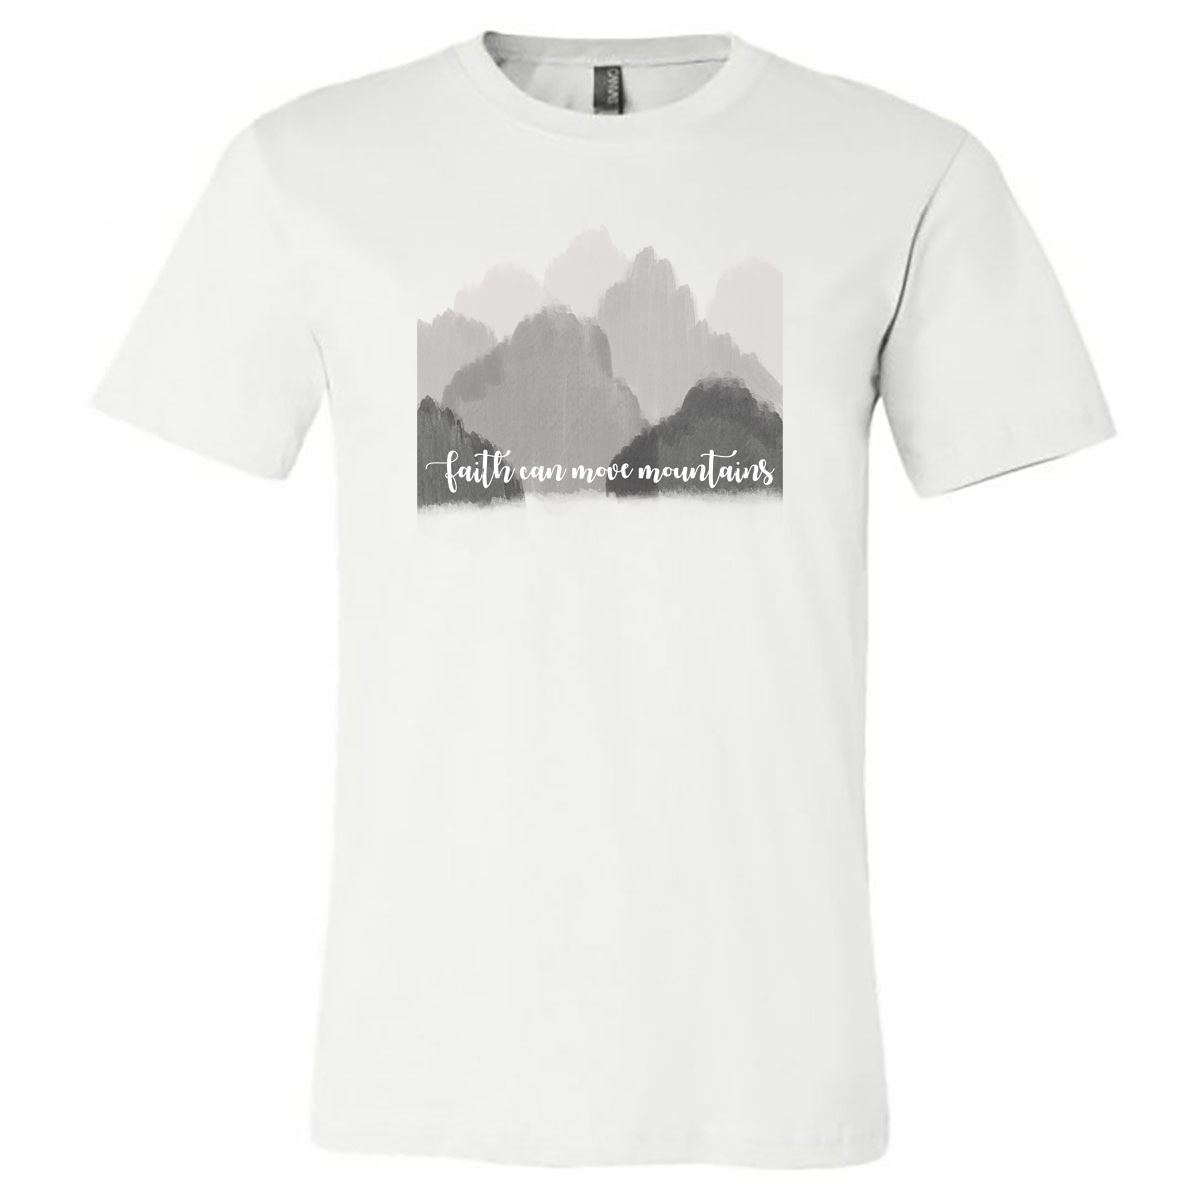 Faith Can Move Mountains Tee (White Tee) - Southern Grace Creations